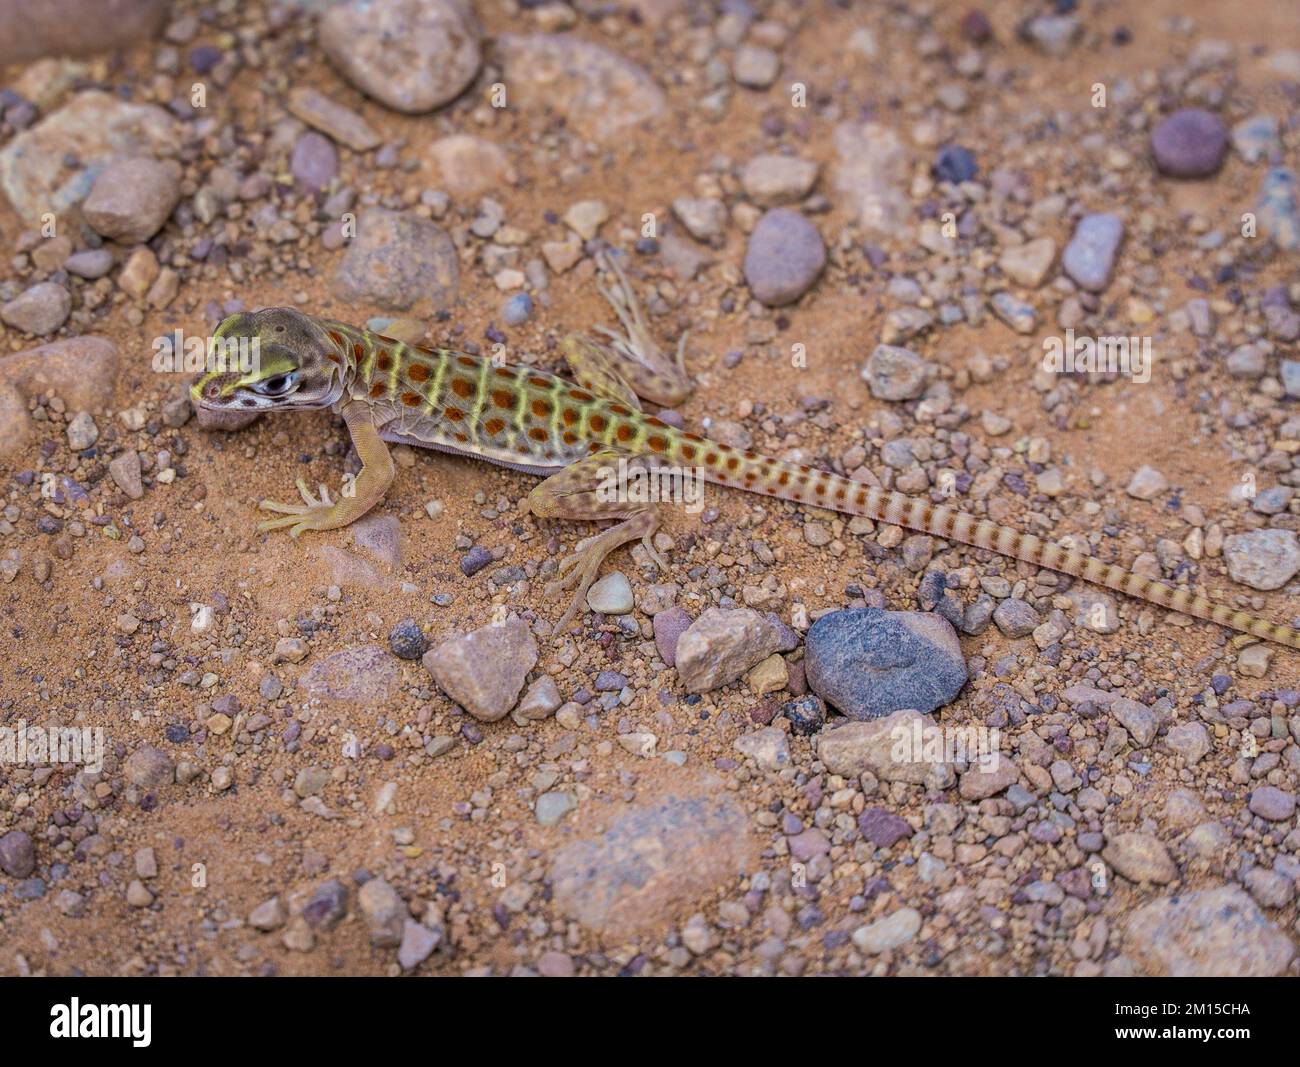 Close up picture of a cute little lizard in the US Sun Stock Photo